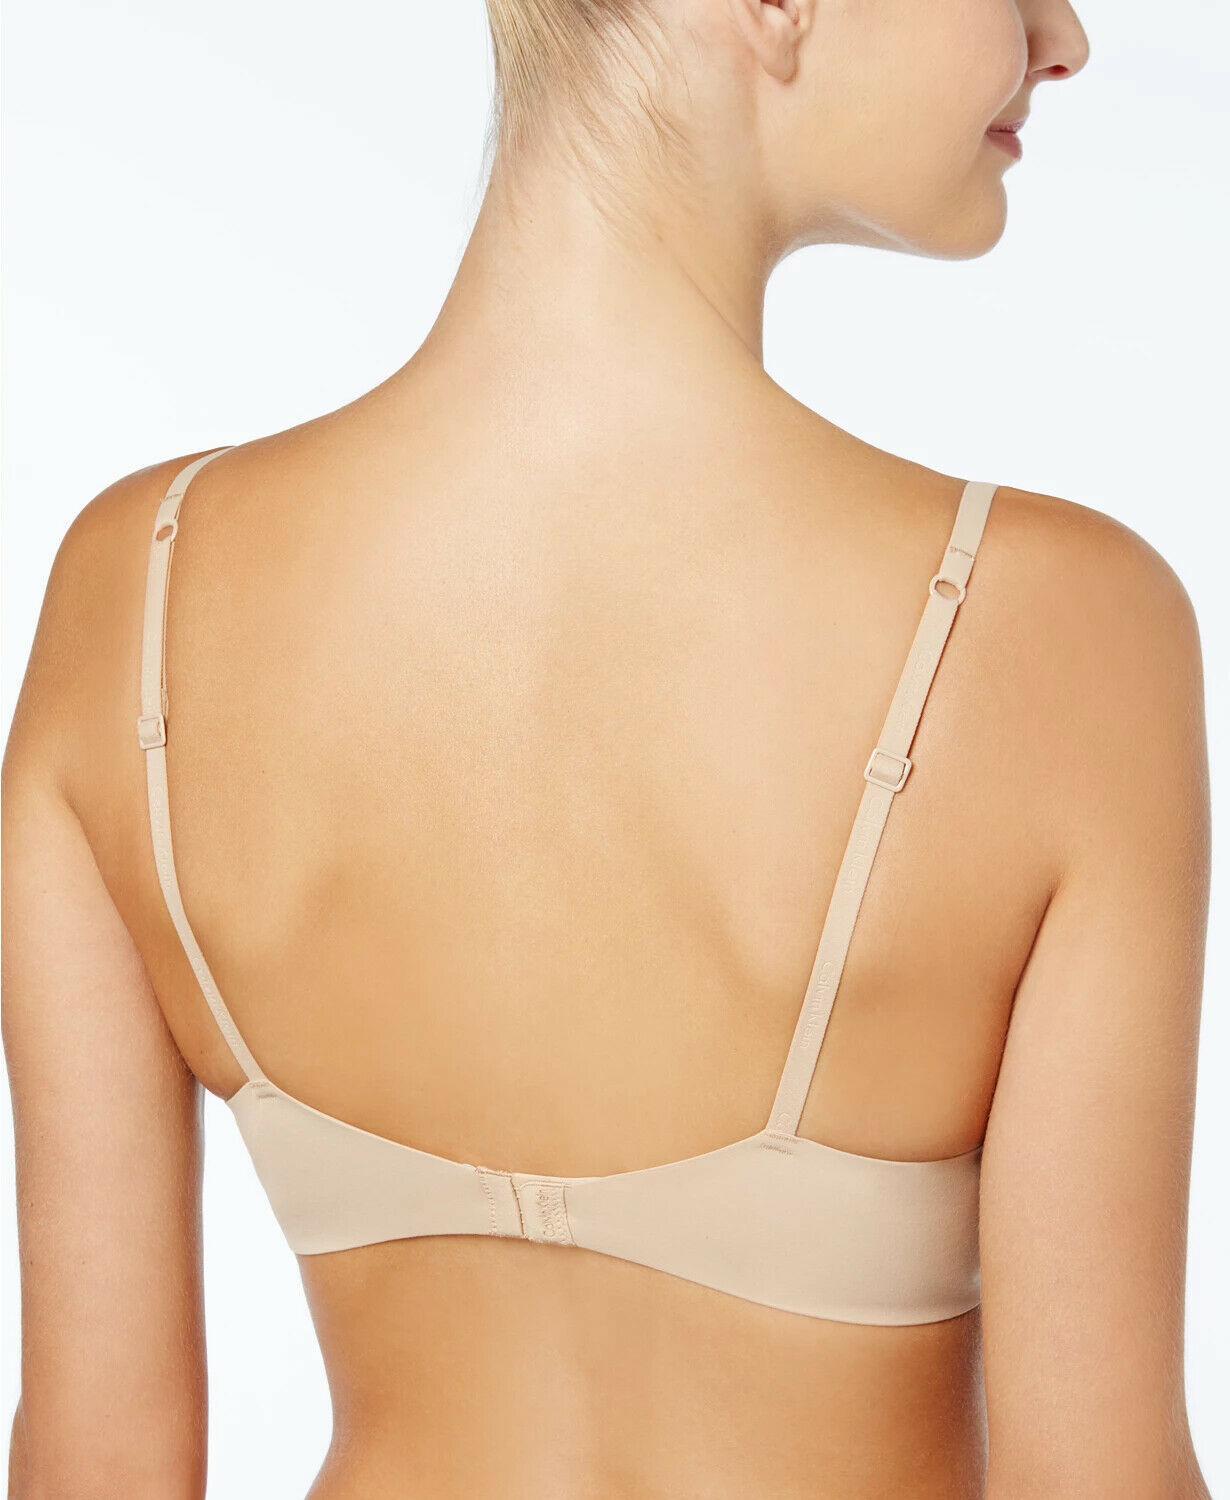 Calvin Klein Perfectly Fit Bare Women's Bra and 32 similar items